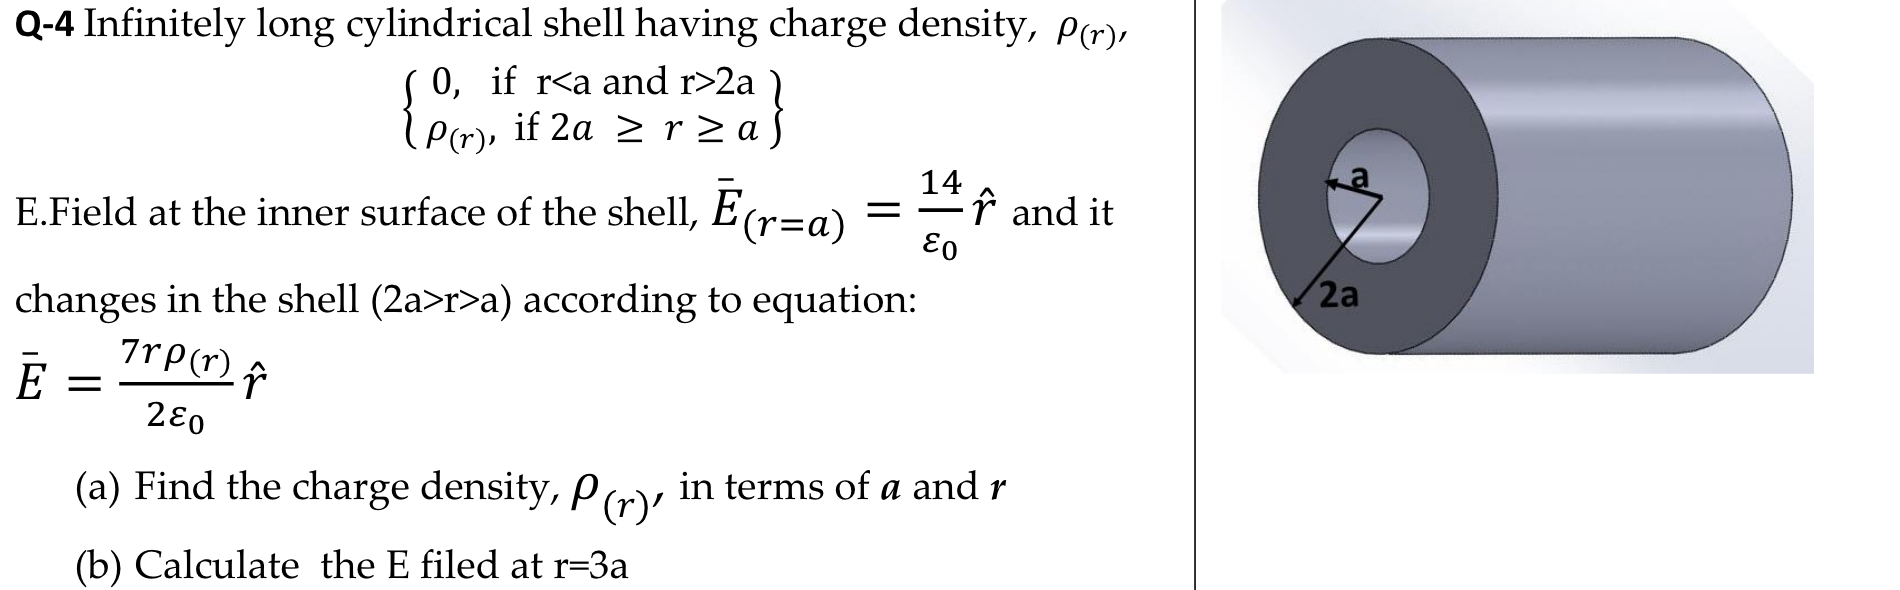 Q-4 Infinitely long cylindrical shell having charge density, P(r),
( 0, if r<a and r>2a
Le, if 2a 2 r > a)
E.Field at the inner surface of the shell, E(r=a)
14
î and it
2a
E = "P(r)
280
changes in the shell (2a>r>a) according to equation:
7rp
(a) Find the charge density, P
oy in terms of a and r
(r)'
(b) Calculate the E filed at r=3a
